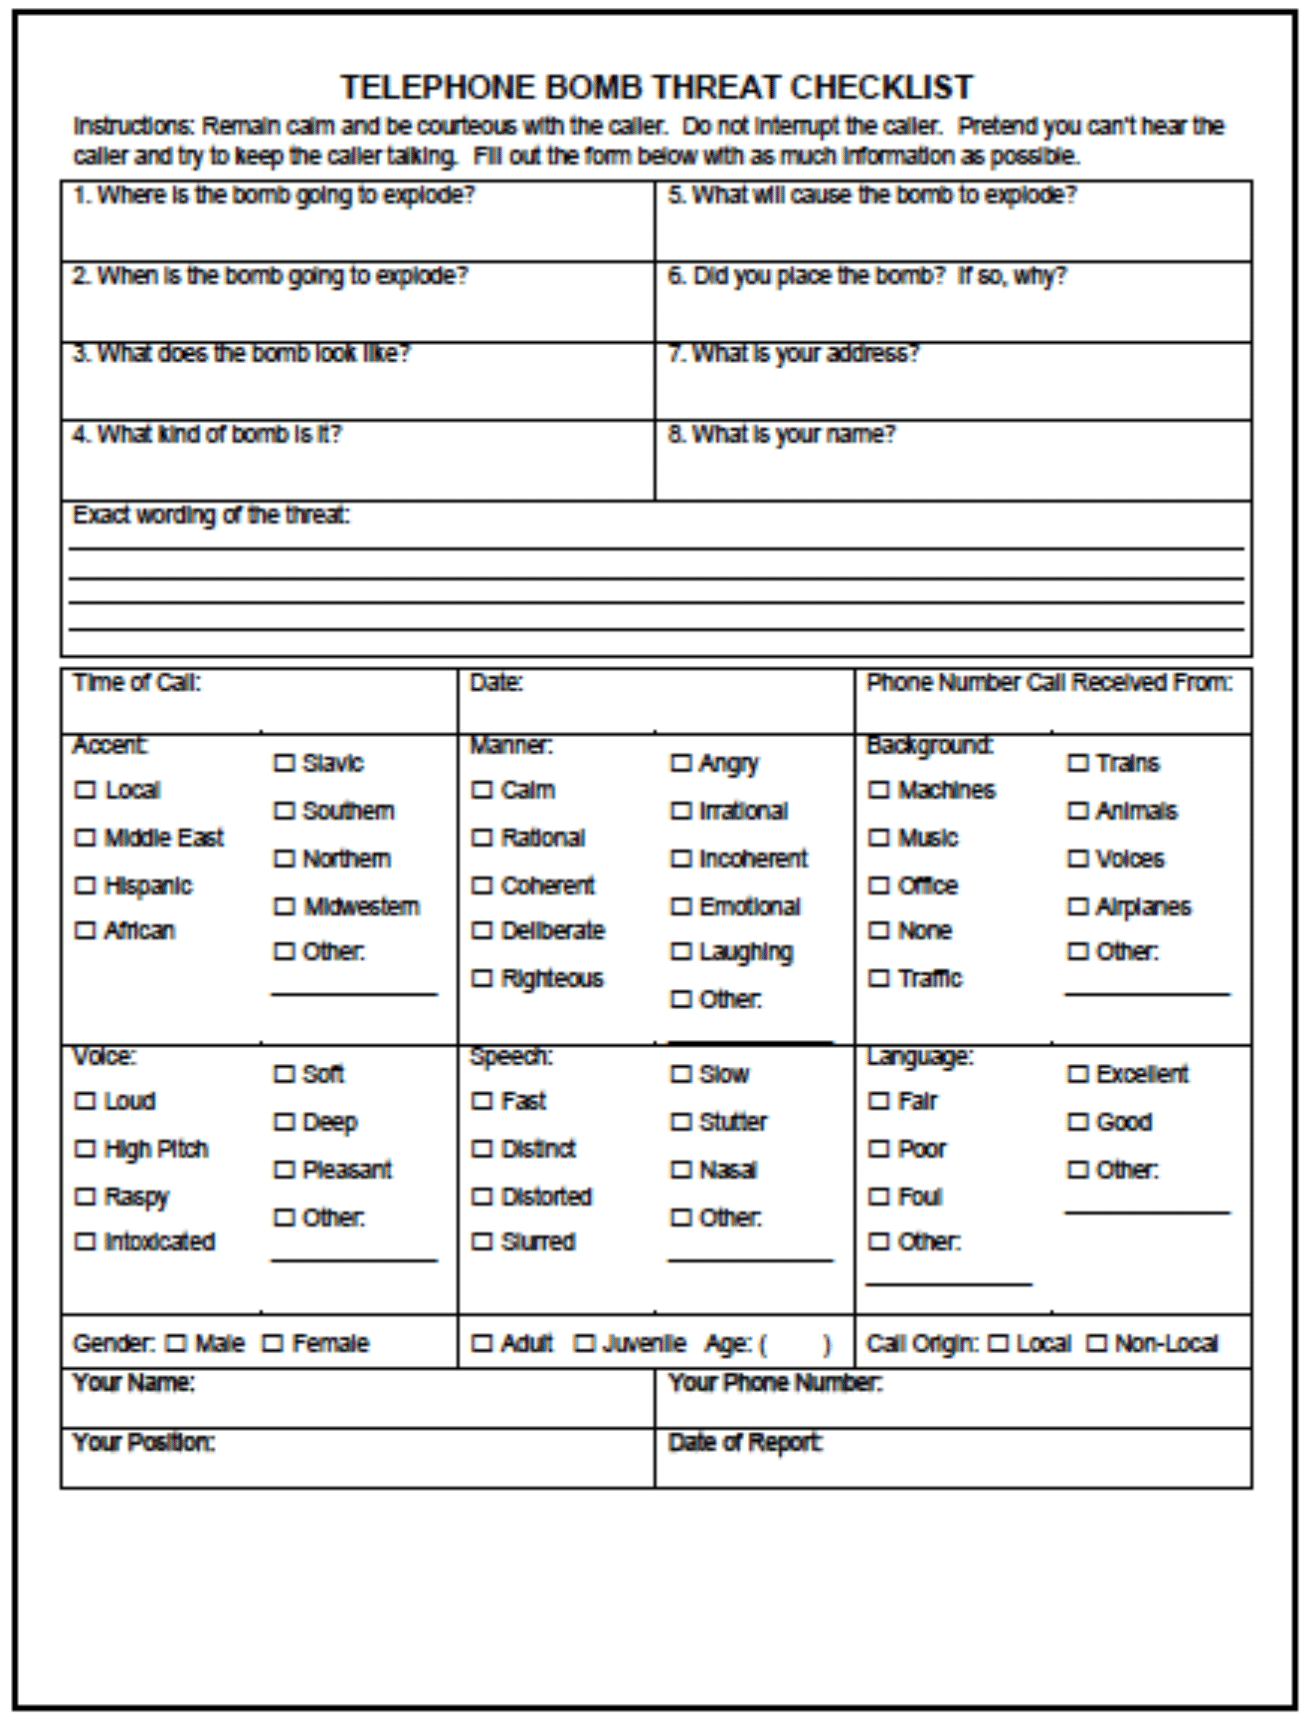 Emergency Action Plan Template Checklist - SafetyCulture Pertaining To Fire Evacuation Checklist Template Regarding Fire Evacuation Checklist Template